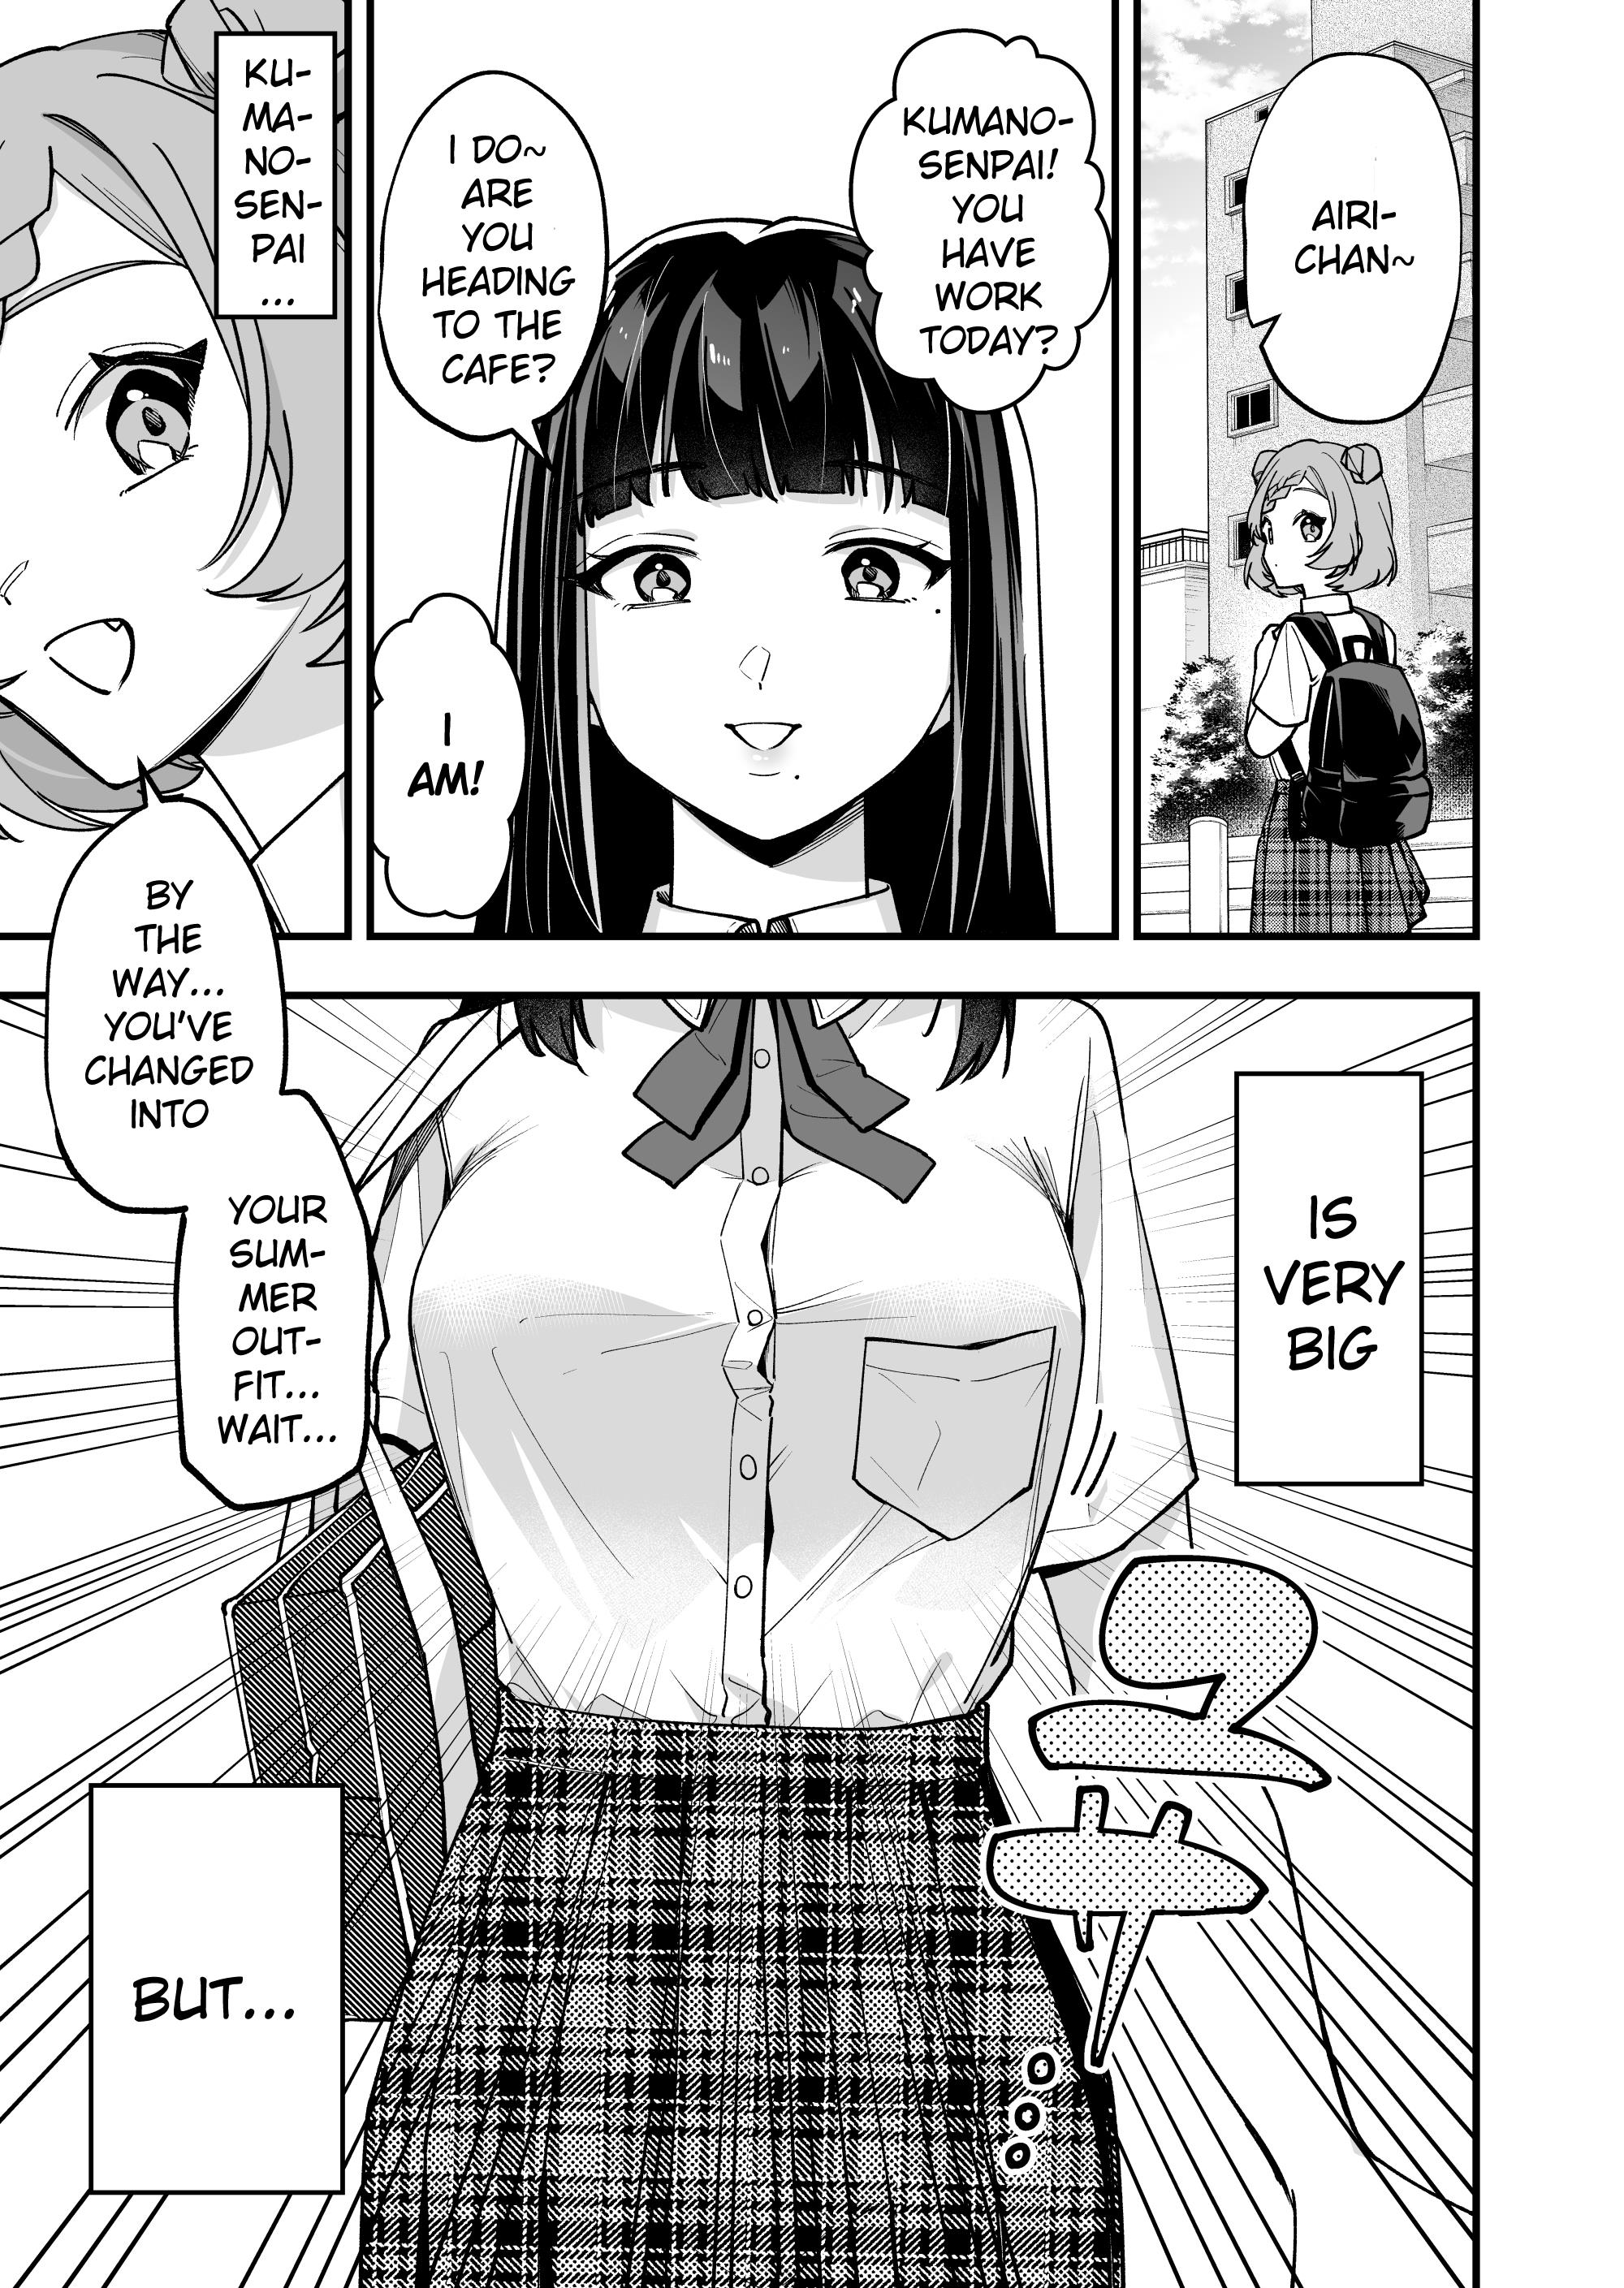 The Manager And The Oblivious Waitress Chapter 22: The Jk & Summer Uniforms - Picture 1